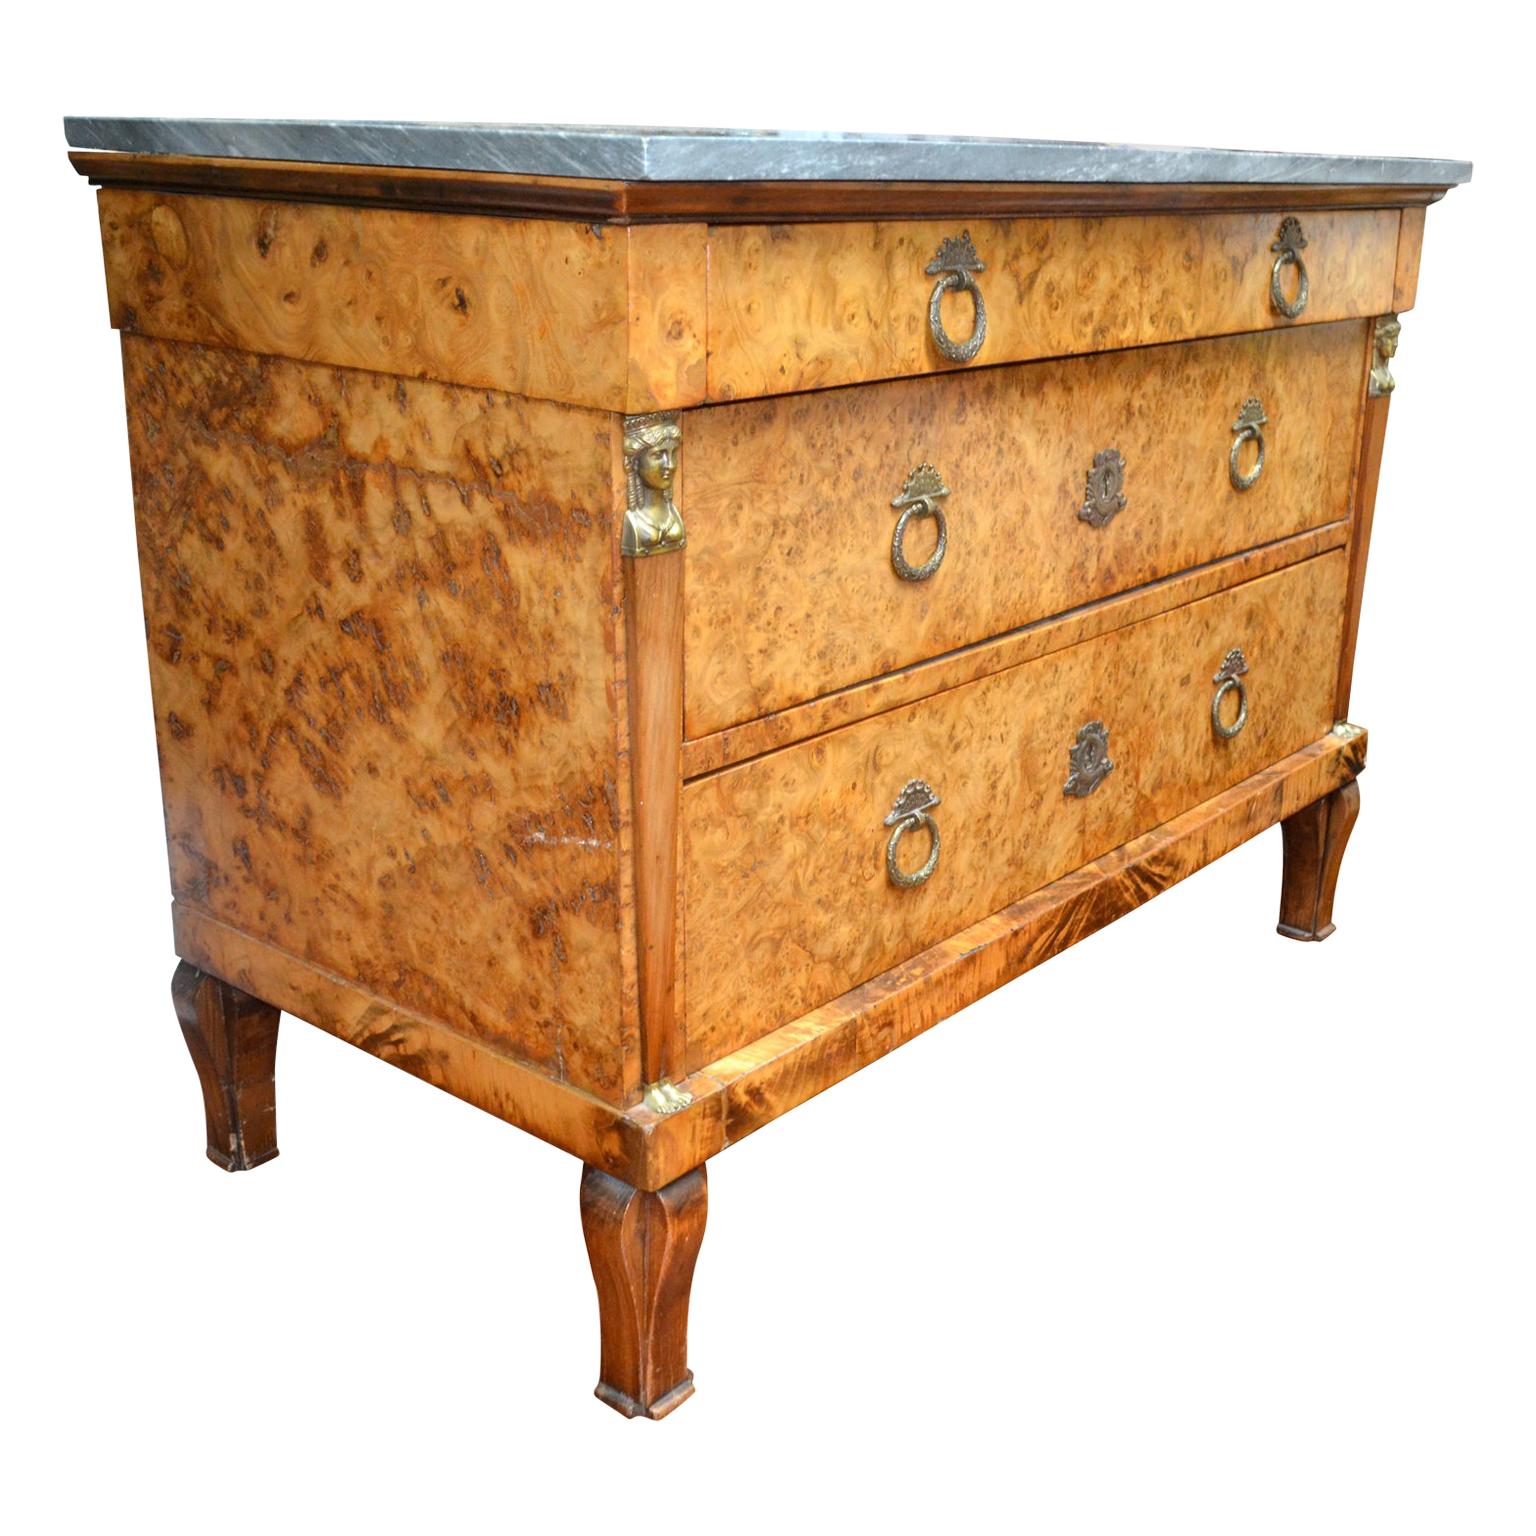 19th Century Swedish Empire Marble Topped Drawer Chest Commode